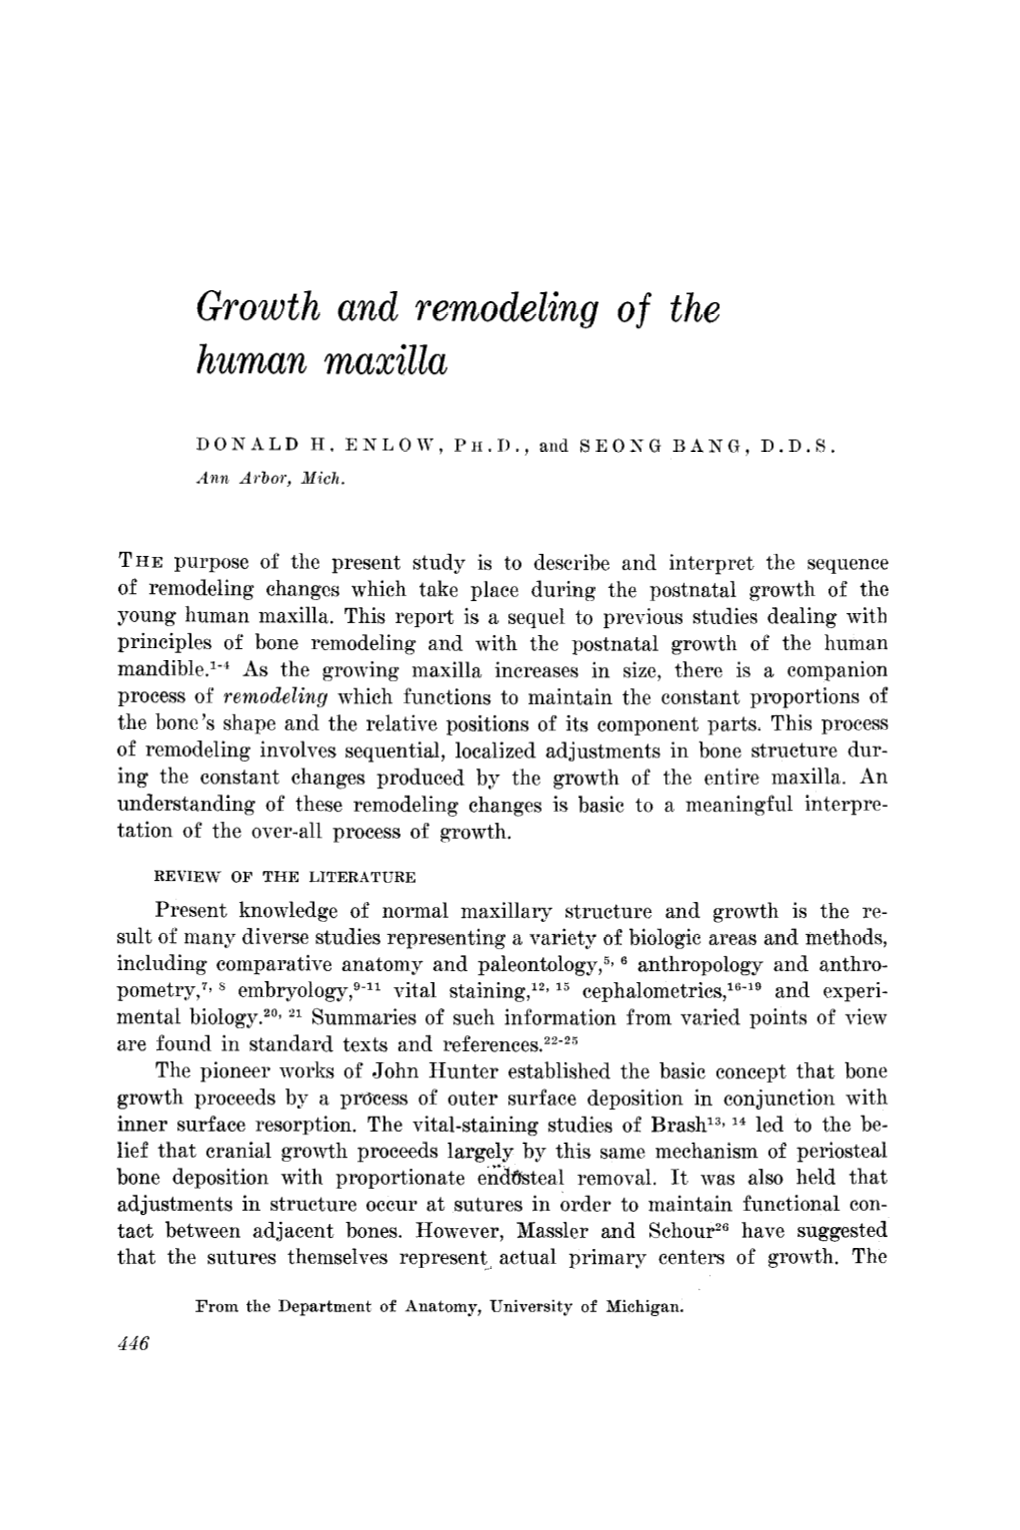 Growth and Remodeling of the Human Maxilla